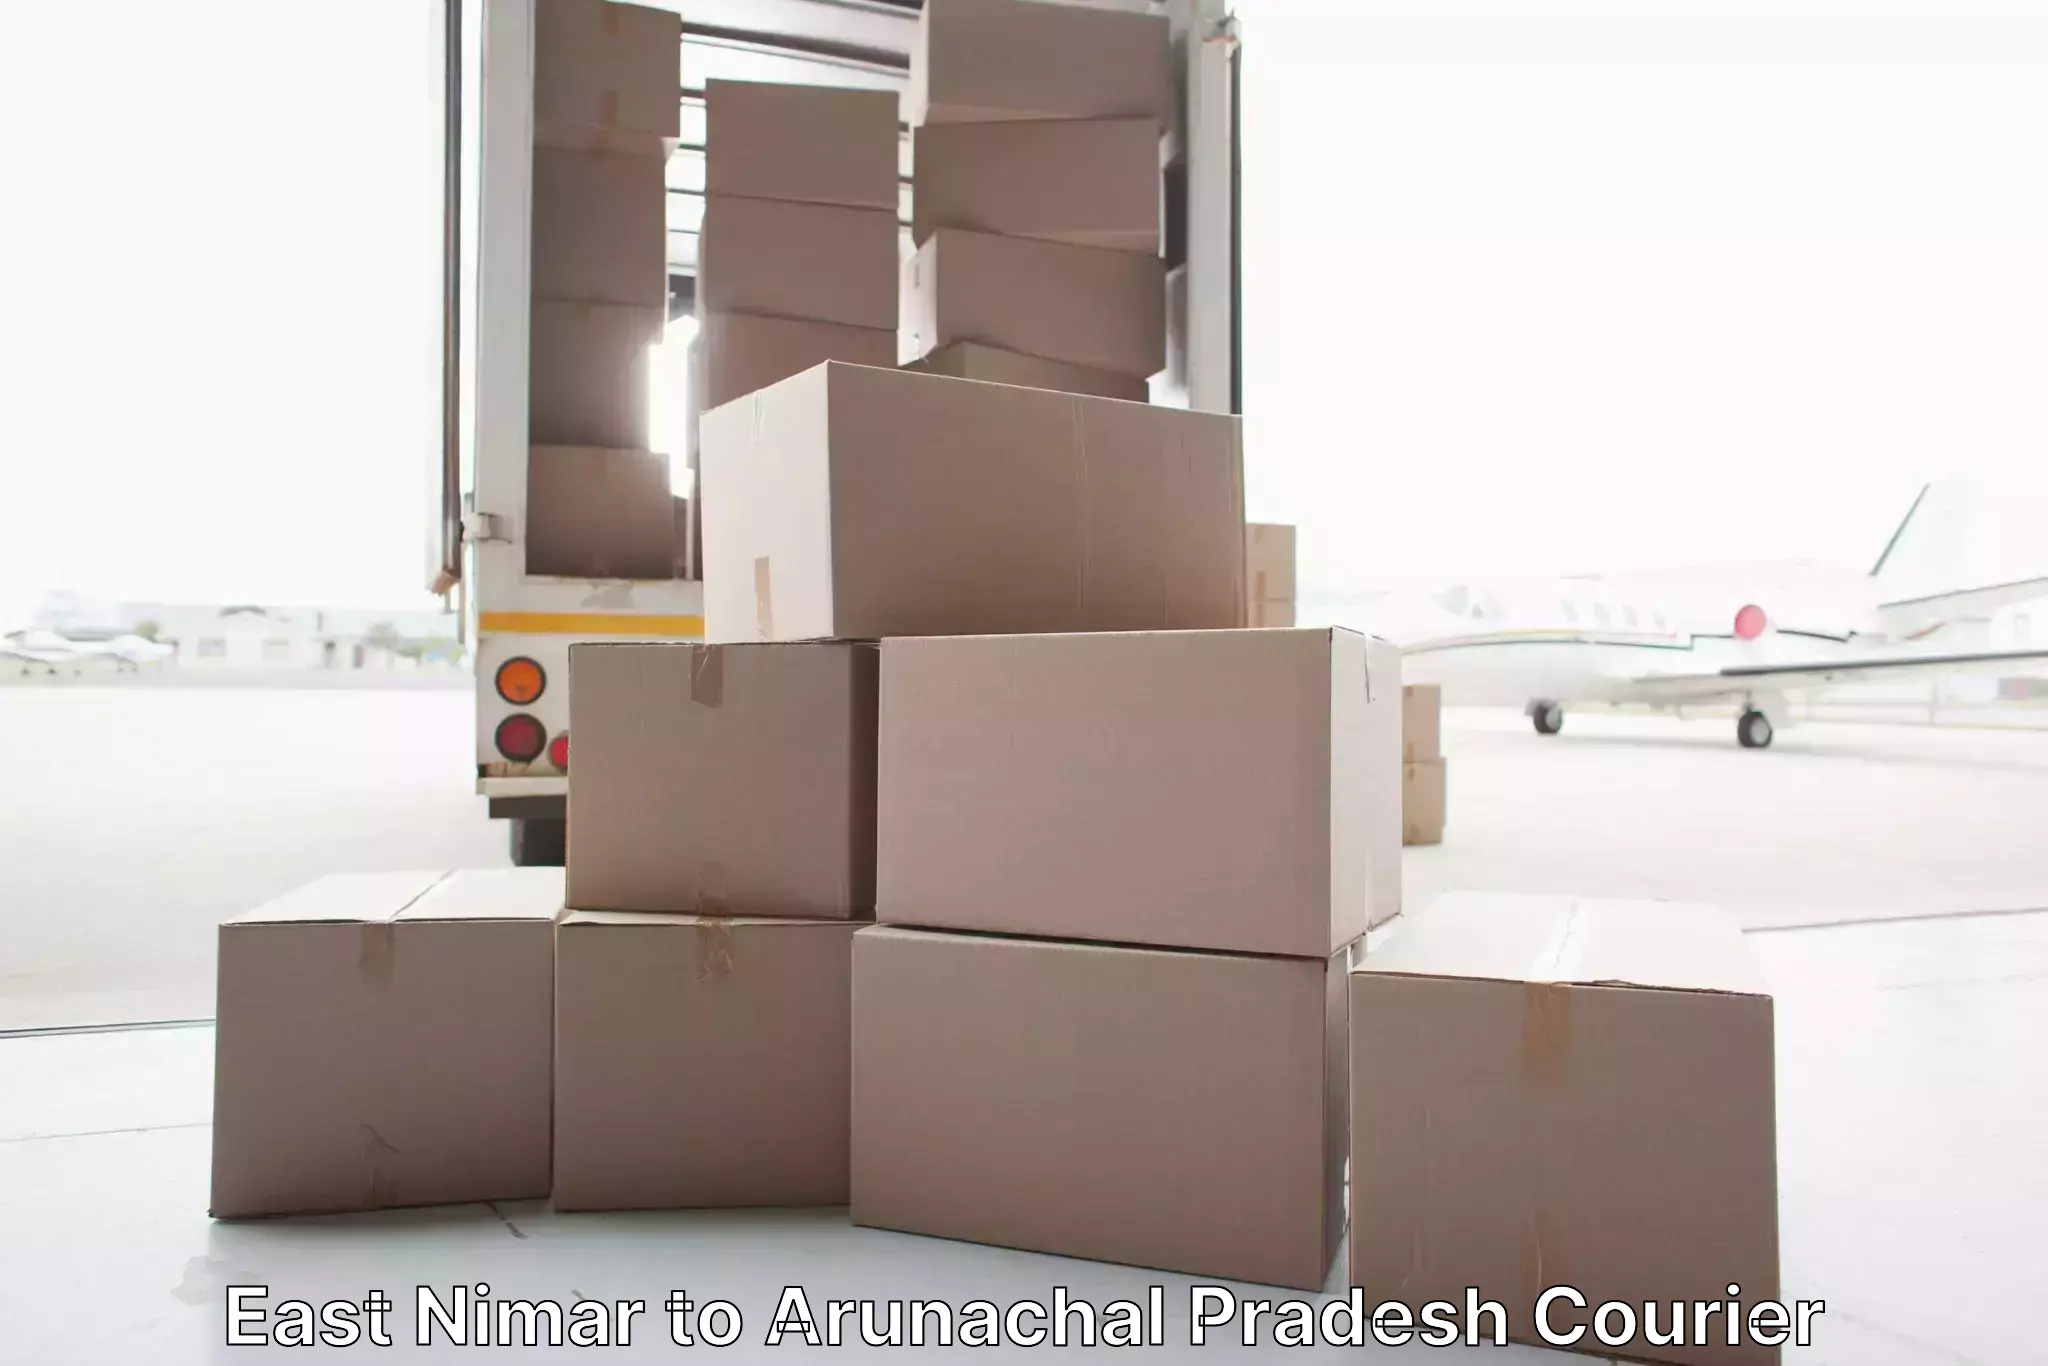 Professional movers and packers East Nimar to Arunachal Pradesh